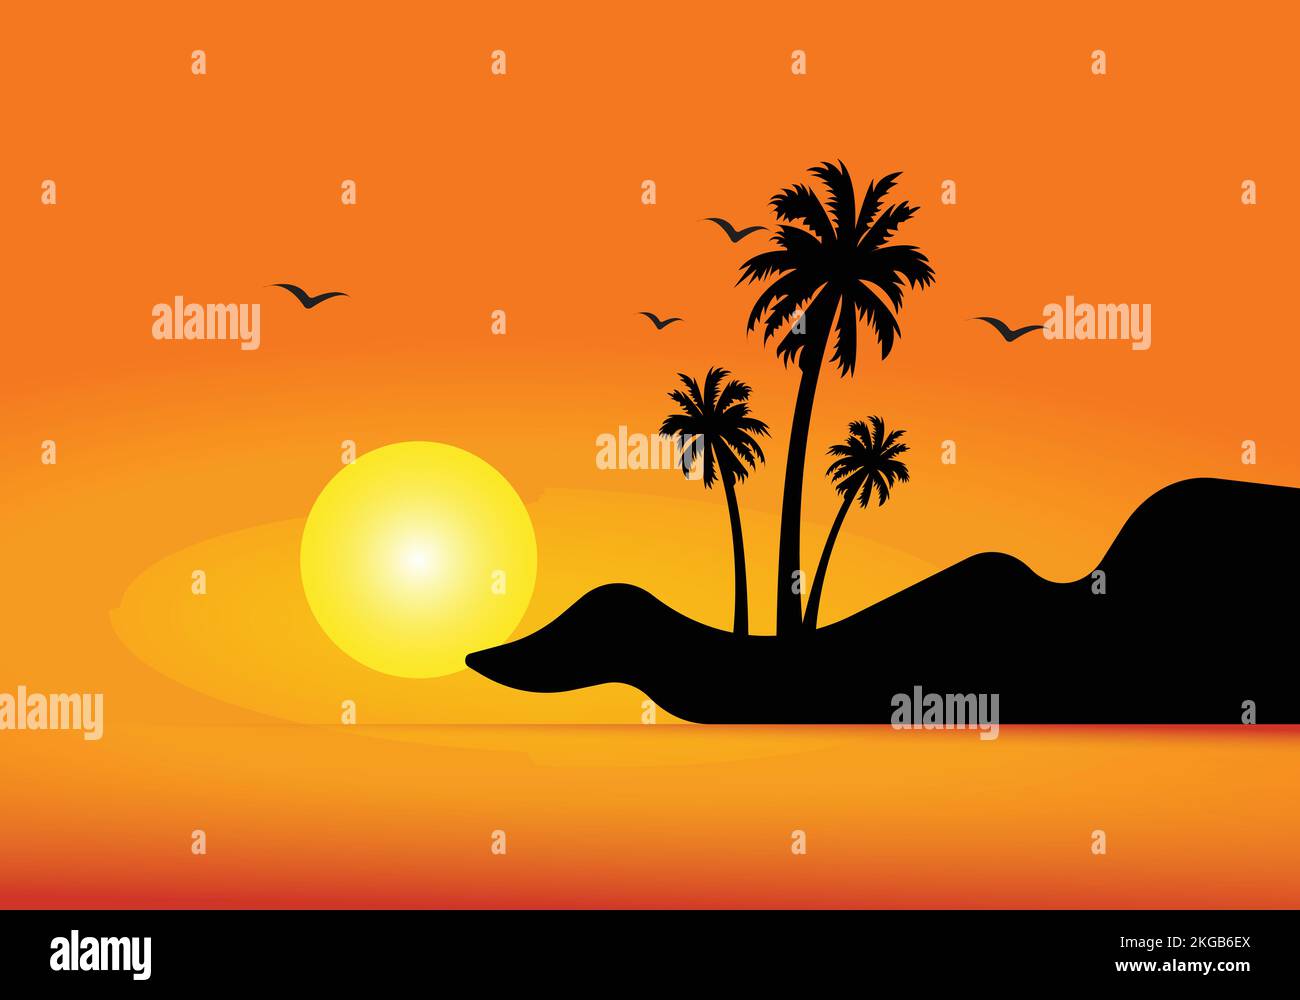 palm tree, sun, birds, and mountain victor landscape Stock Vector